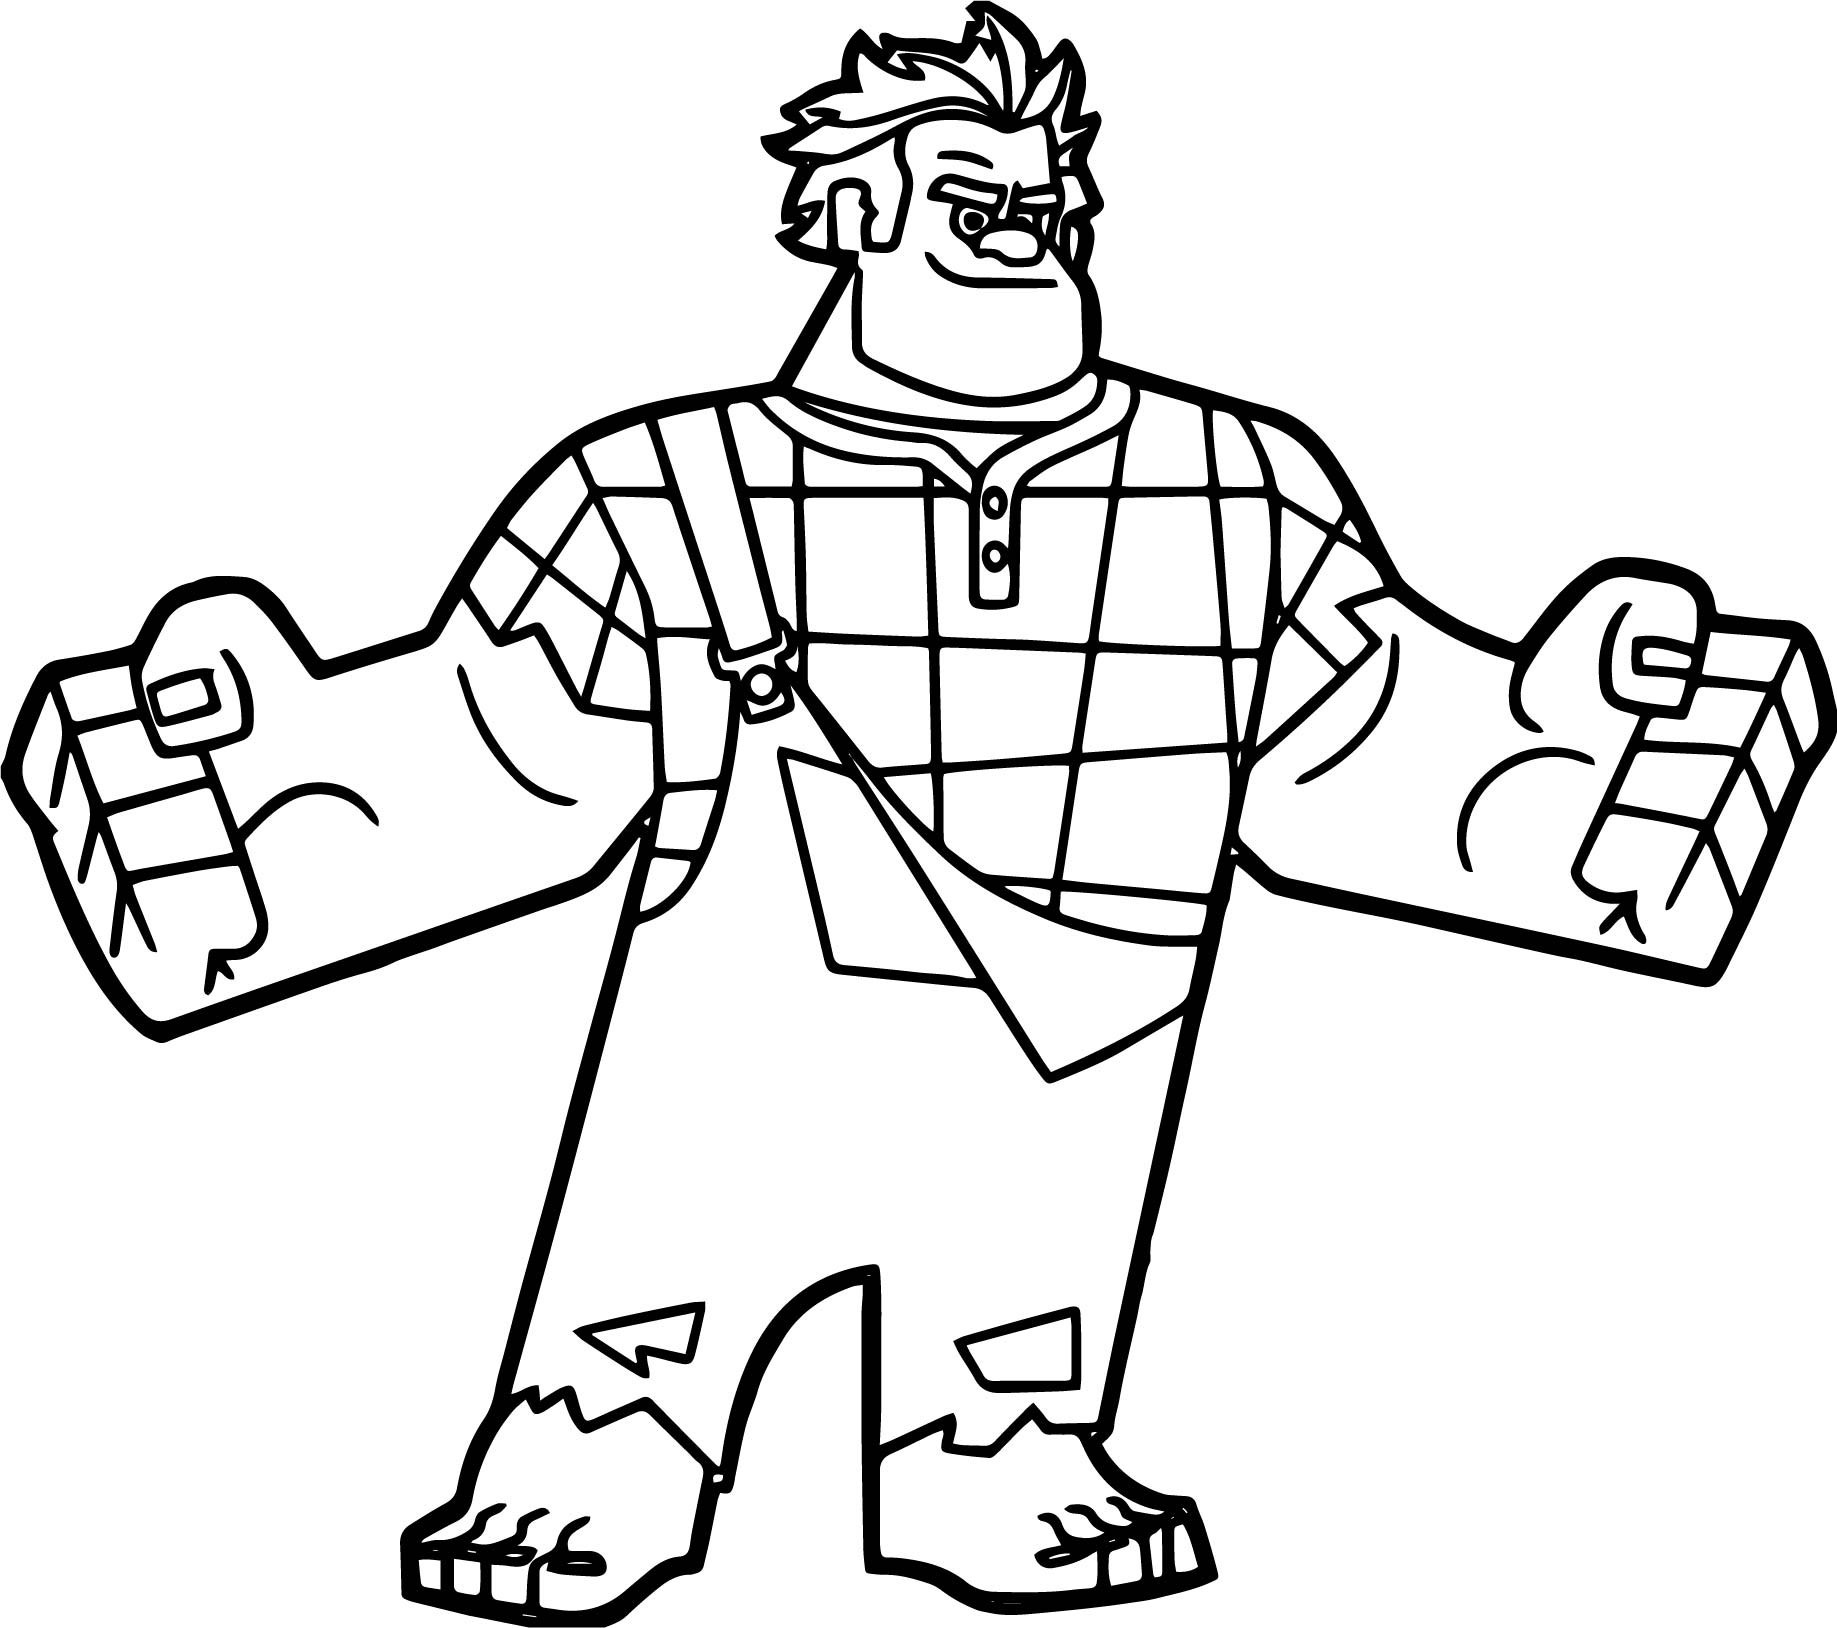 Strong Ralph Coloring Page - Free Printable Coloring Pages for Kids